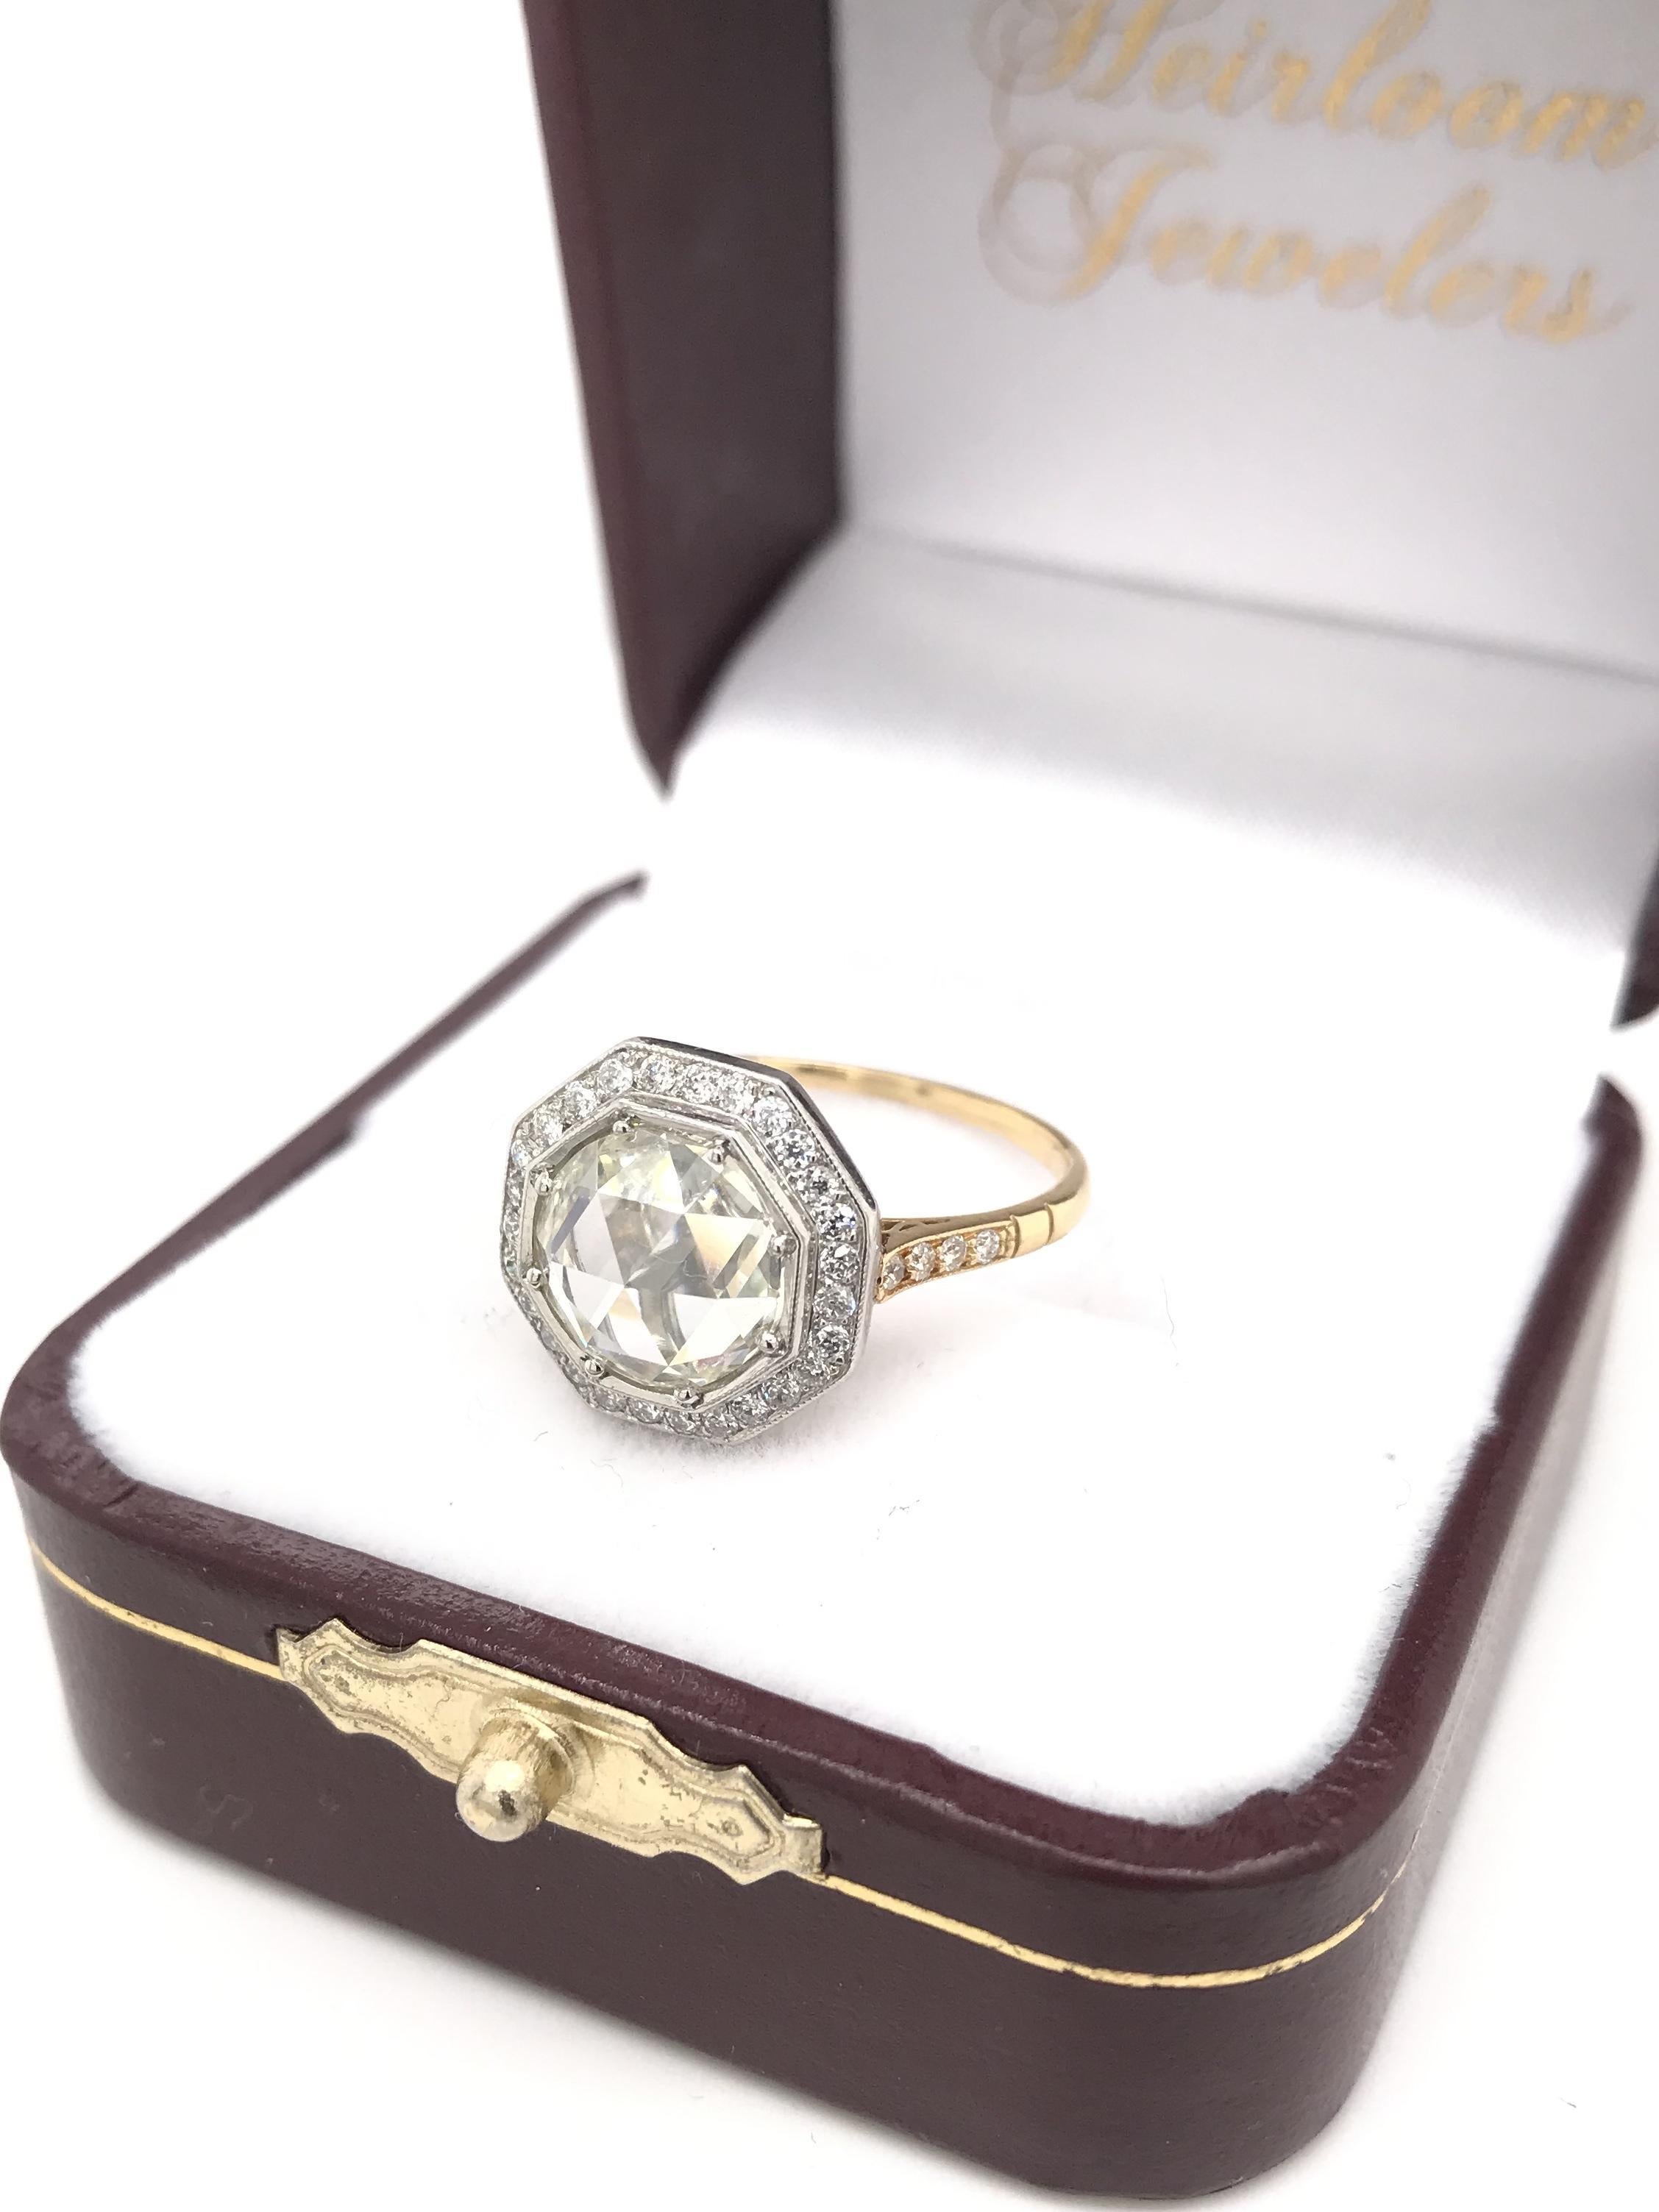 Contemporary Antique Inspired 2.63 Carat Rose Cut Diamond Ring For Sale 5